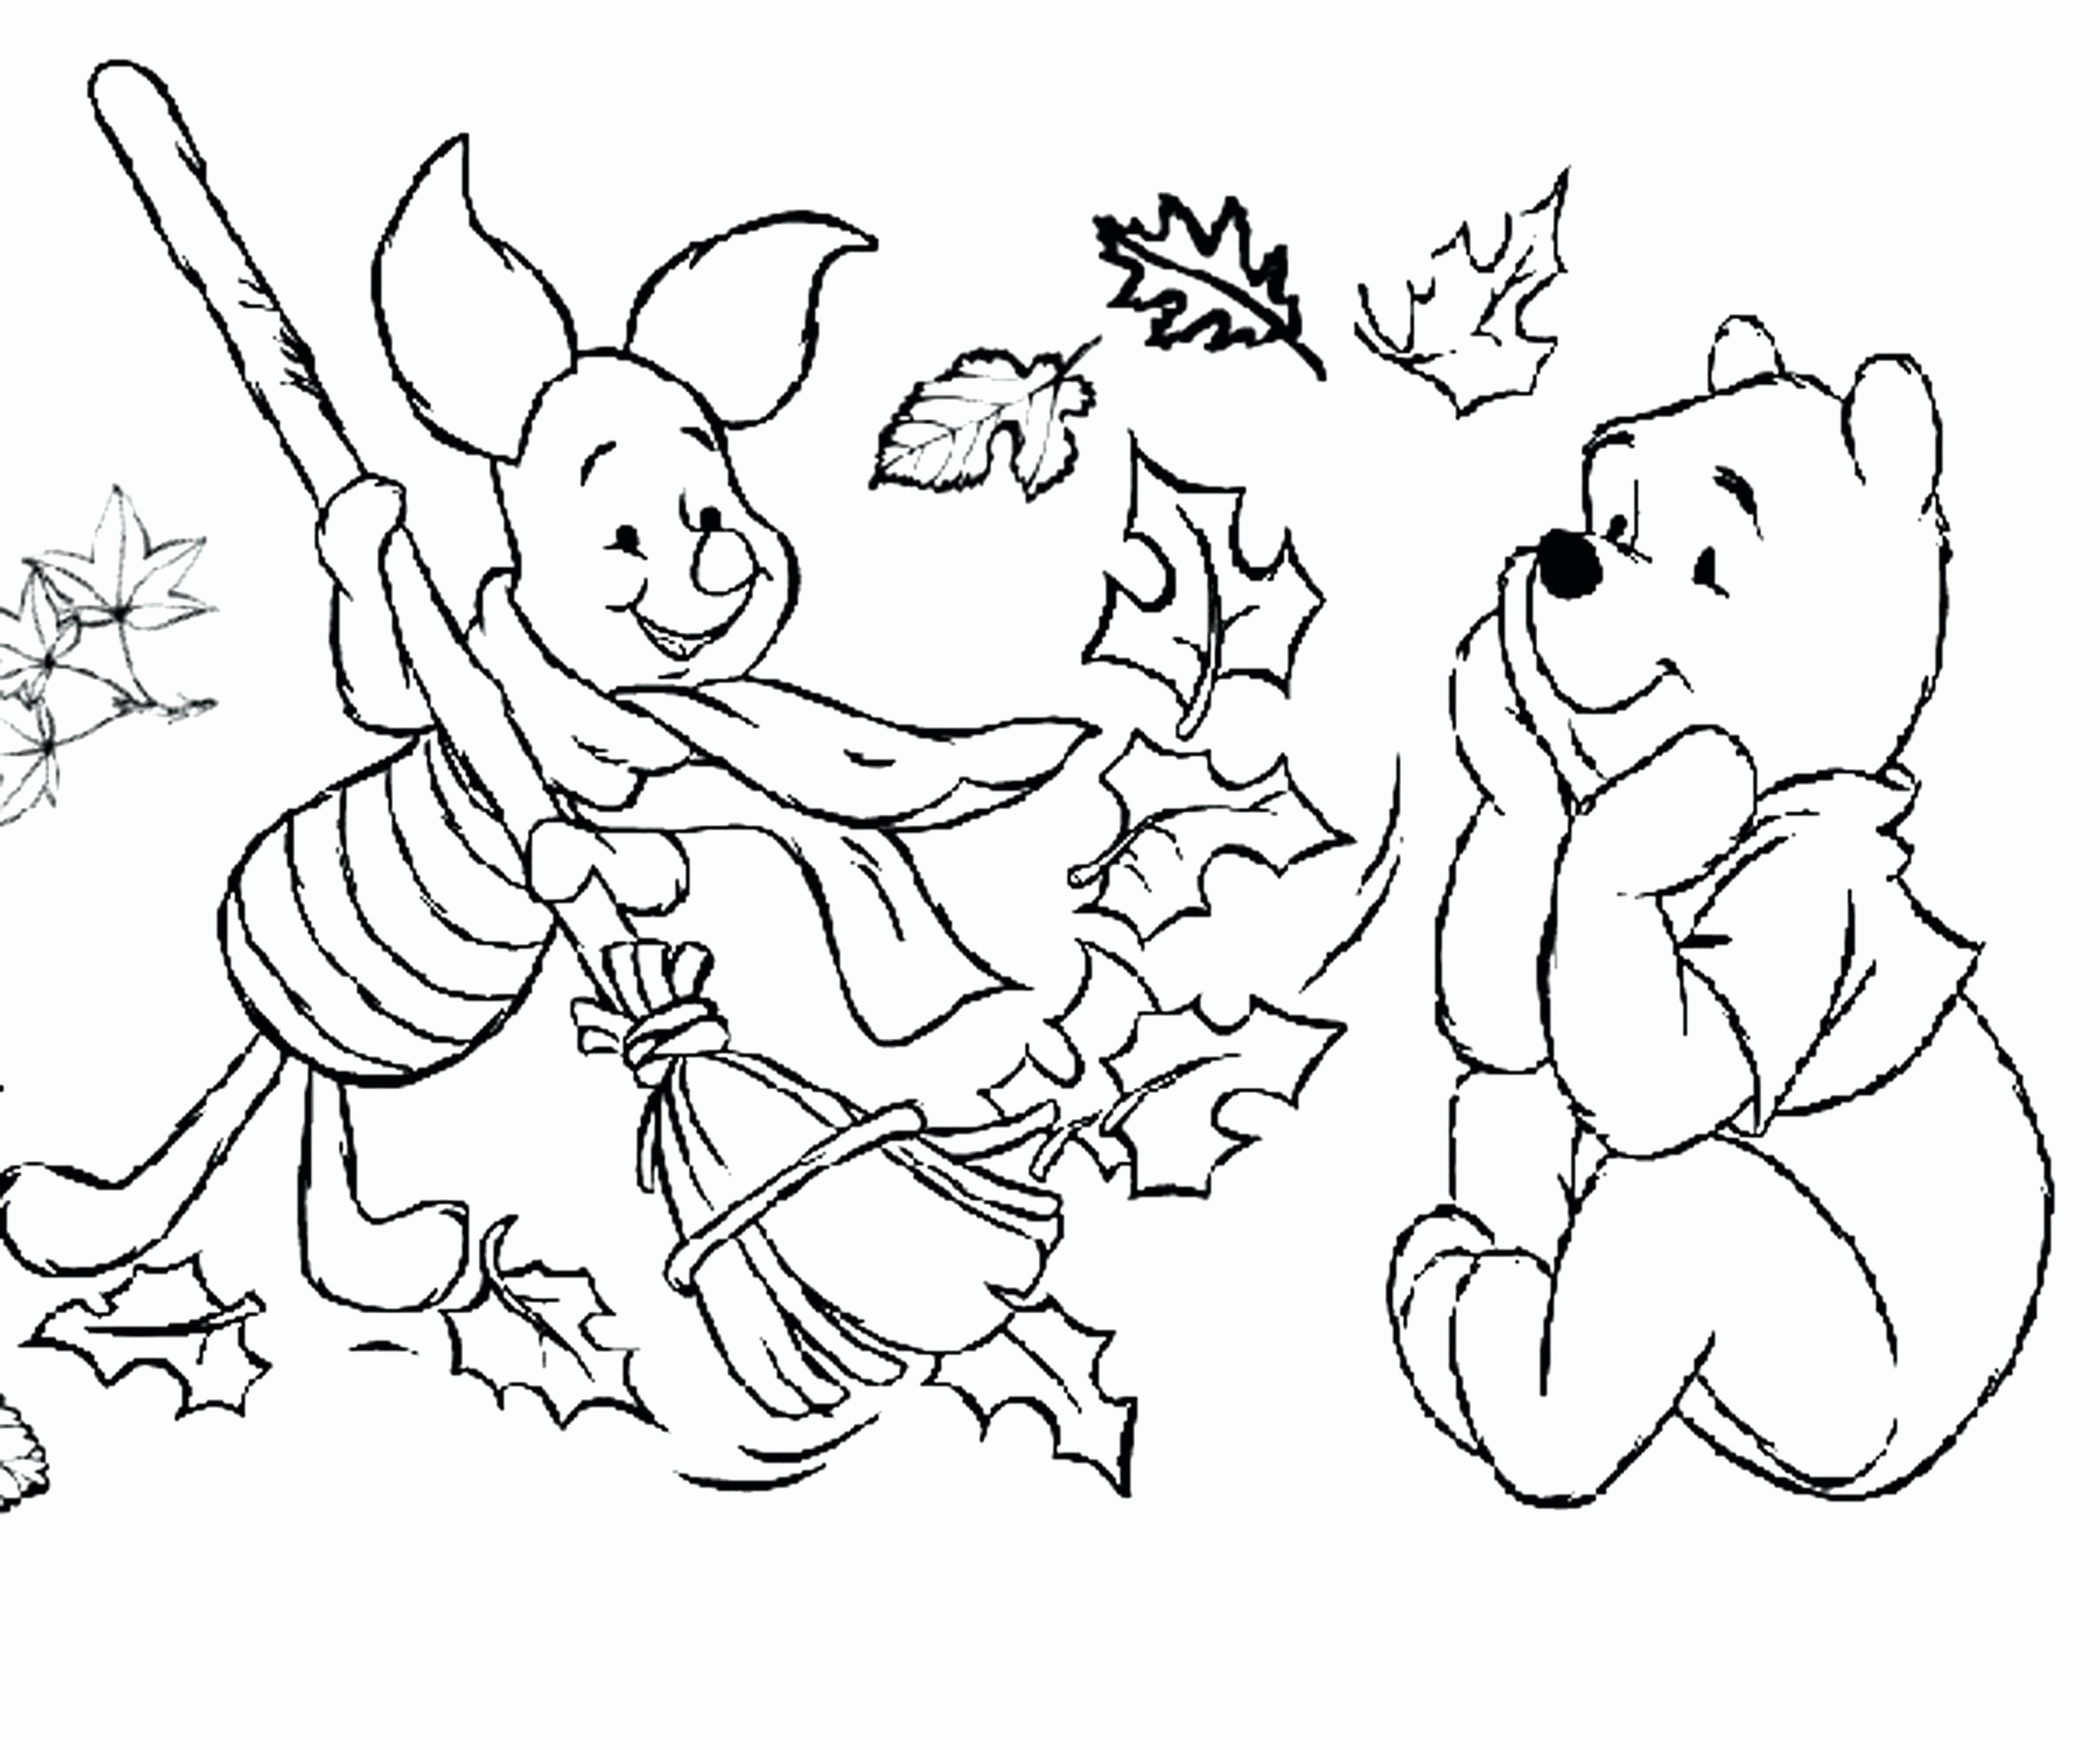 Elmer Fudd Coloring Pages New Crayola Ultimate Spiderman Mini Coloring Pages Nicho